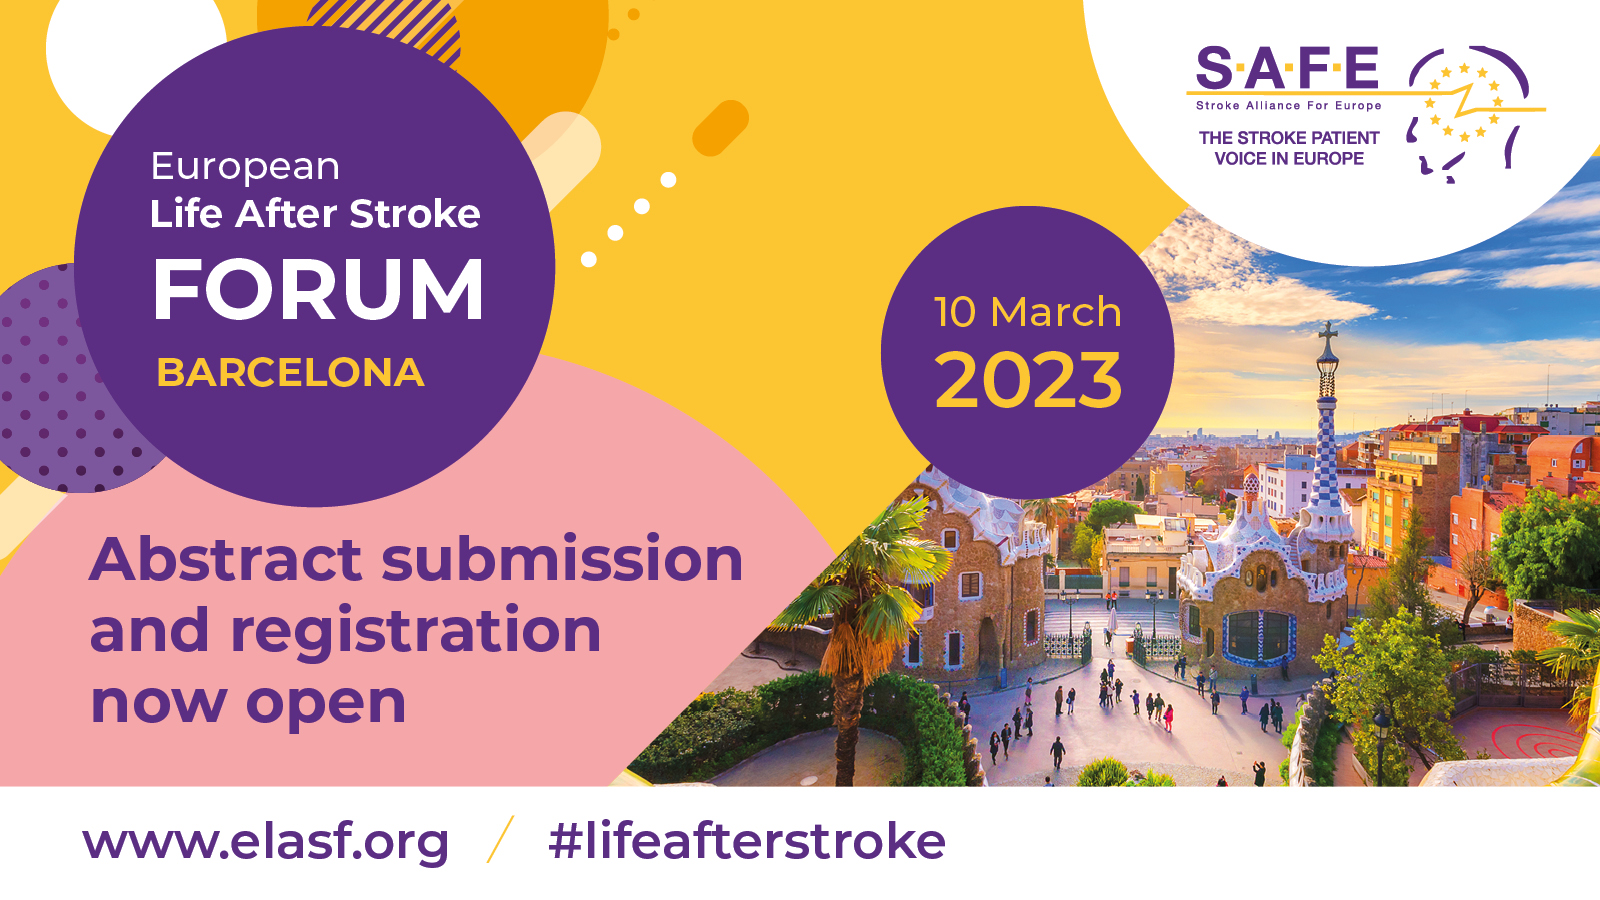 Abstract submission deadline extended for the European Life After Stroke Forum